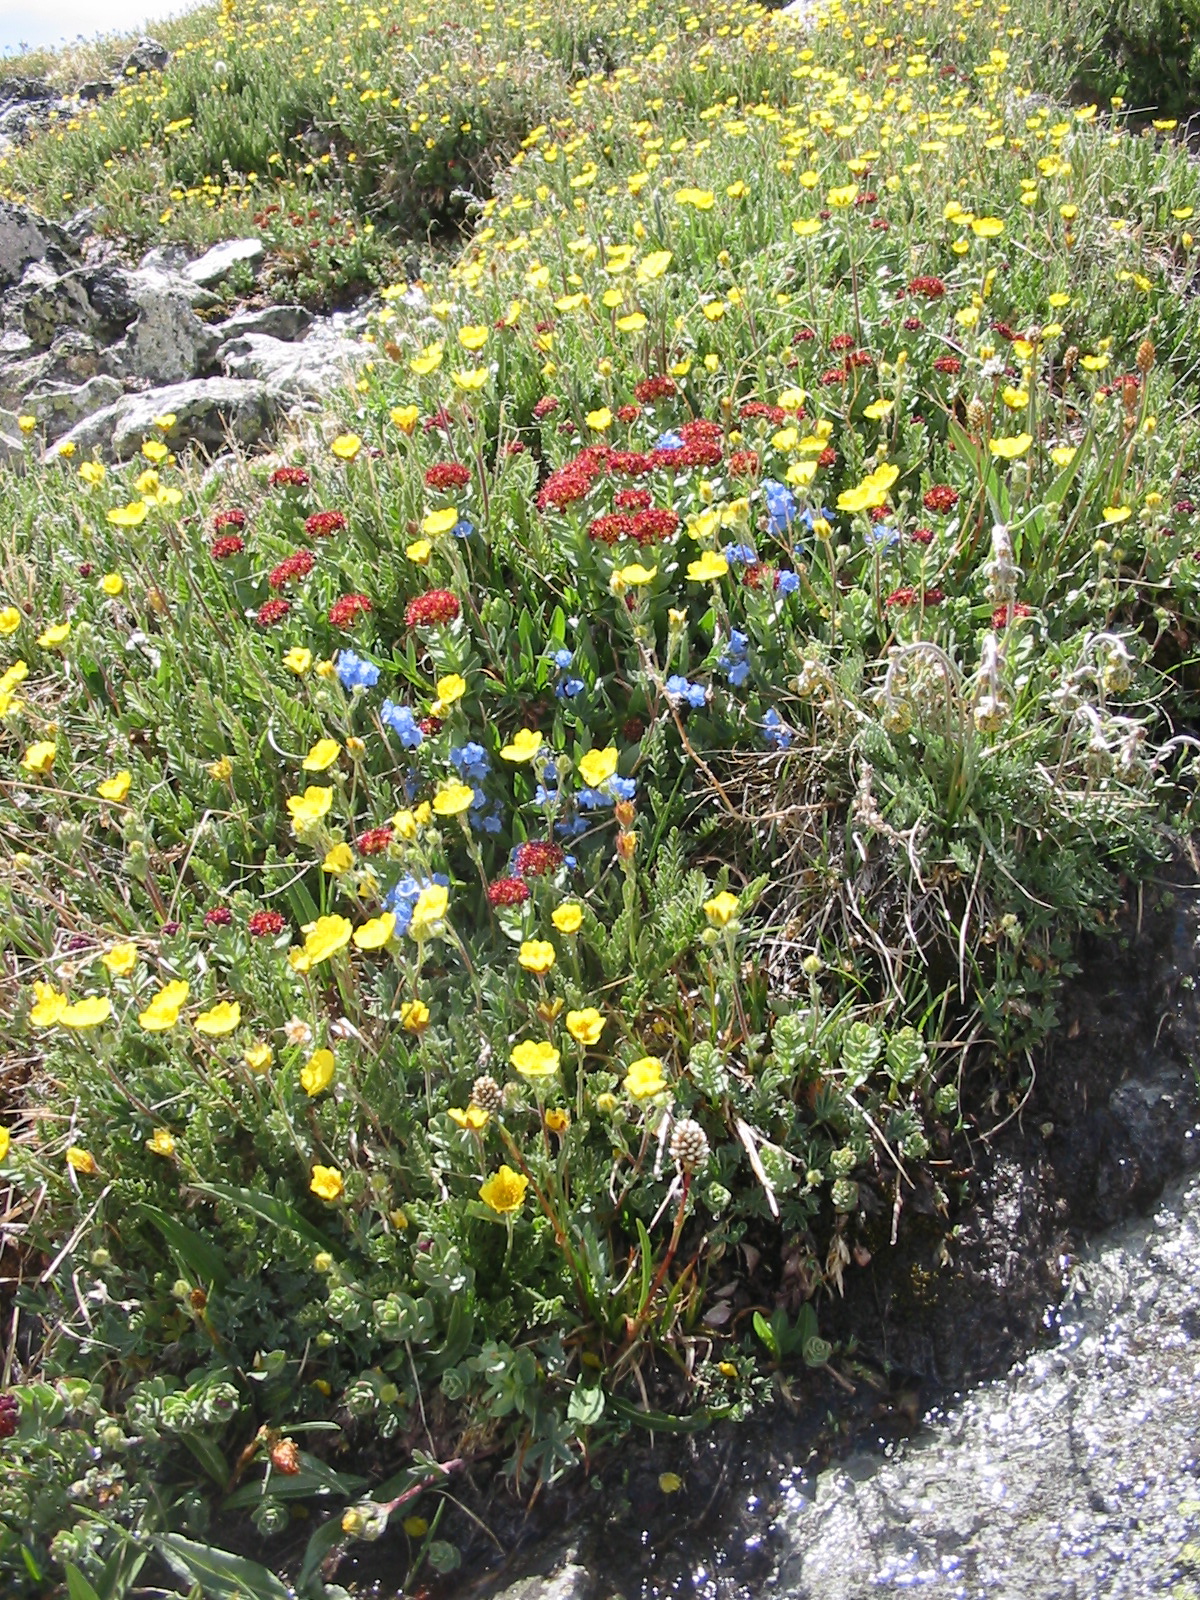 Alpine meadow with Buttercups, King's Crown, and Alpine Forgetmenot